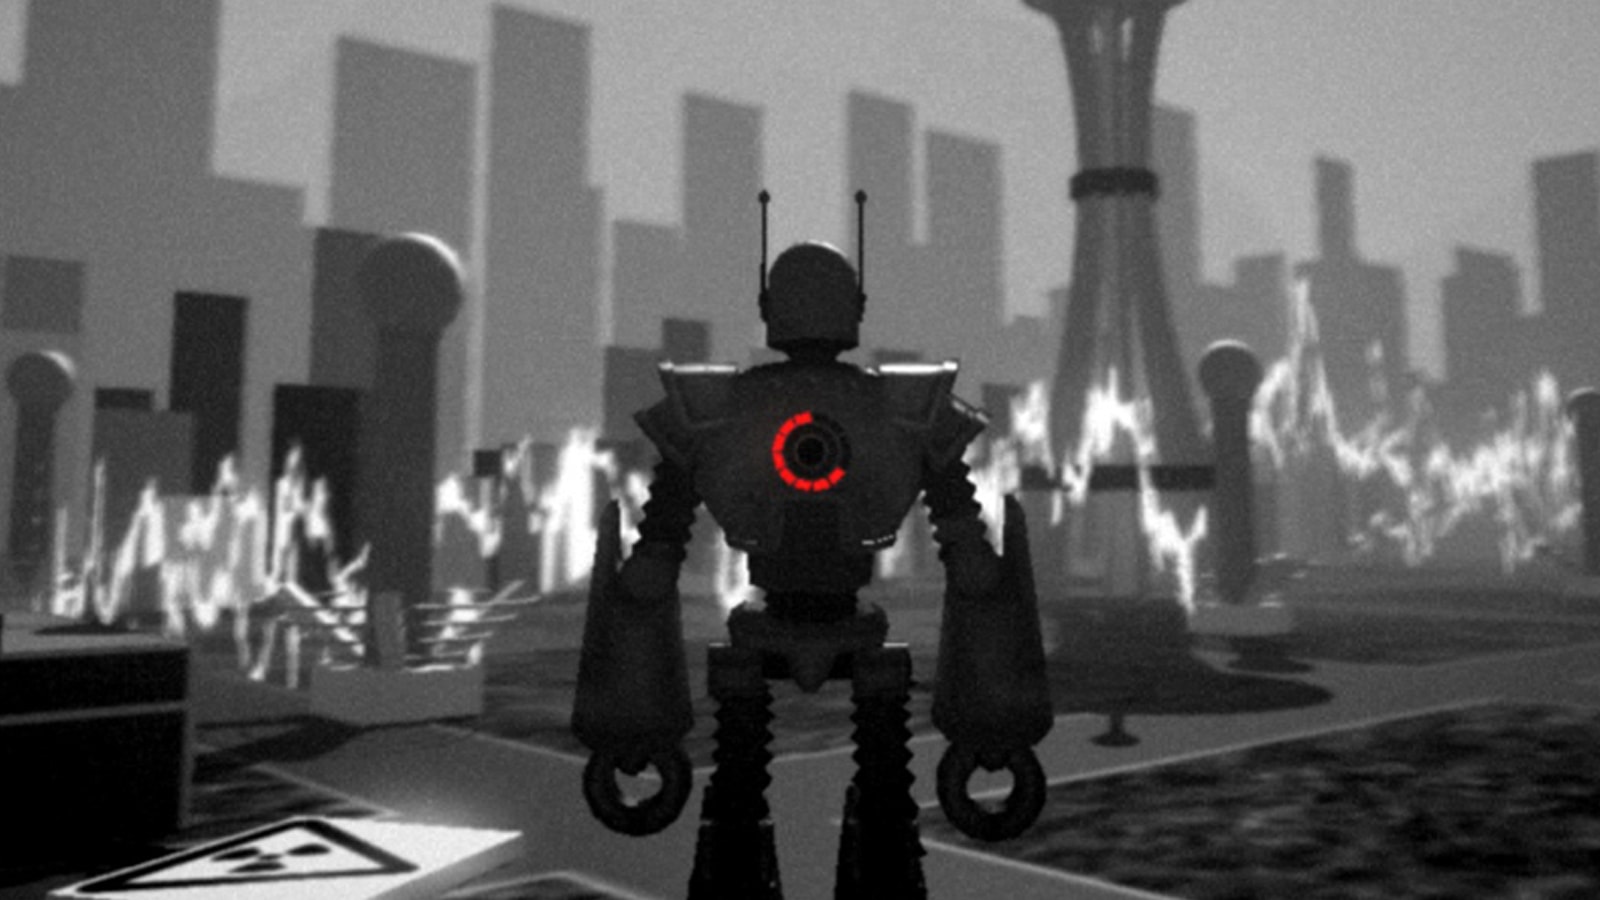 The backside of a large robot with two claw-like hands and a red light-up meter on it.